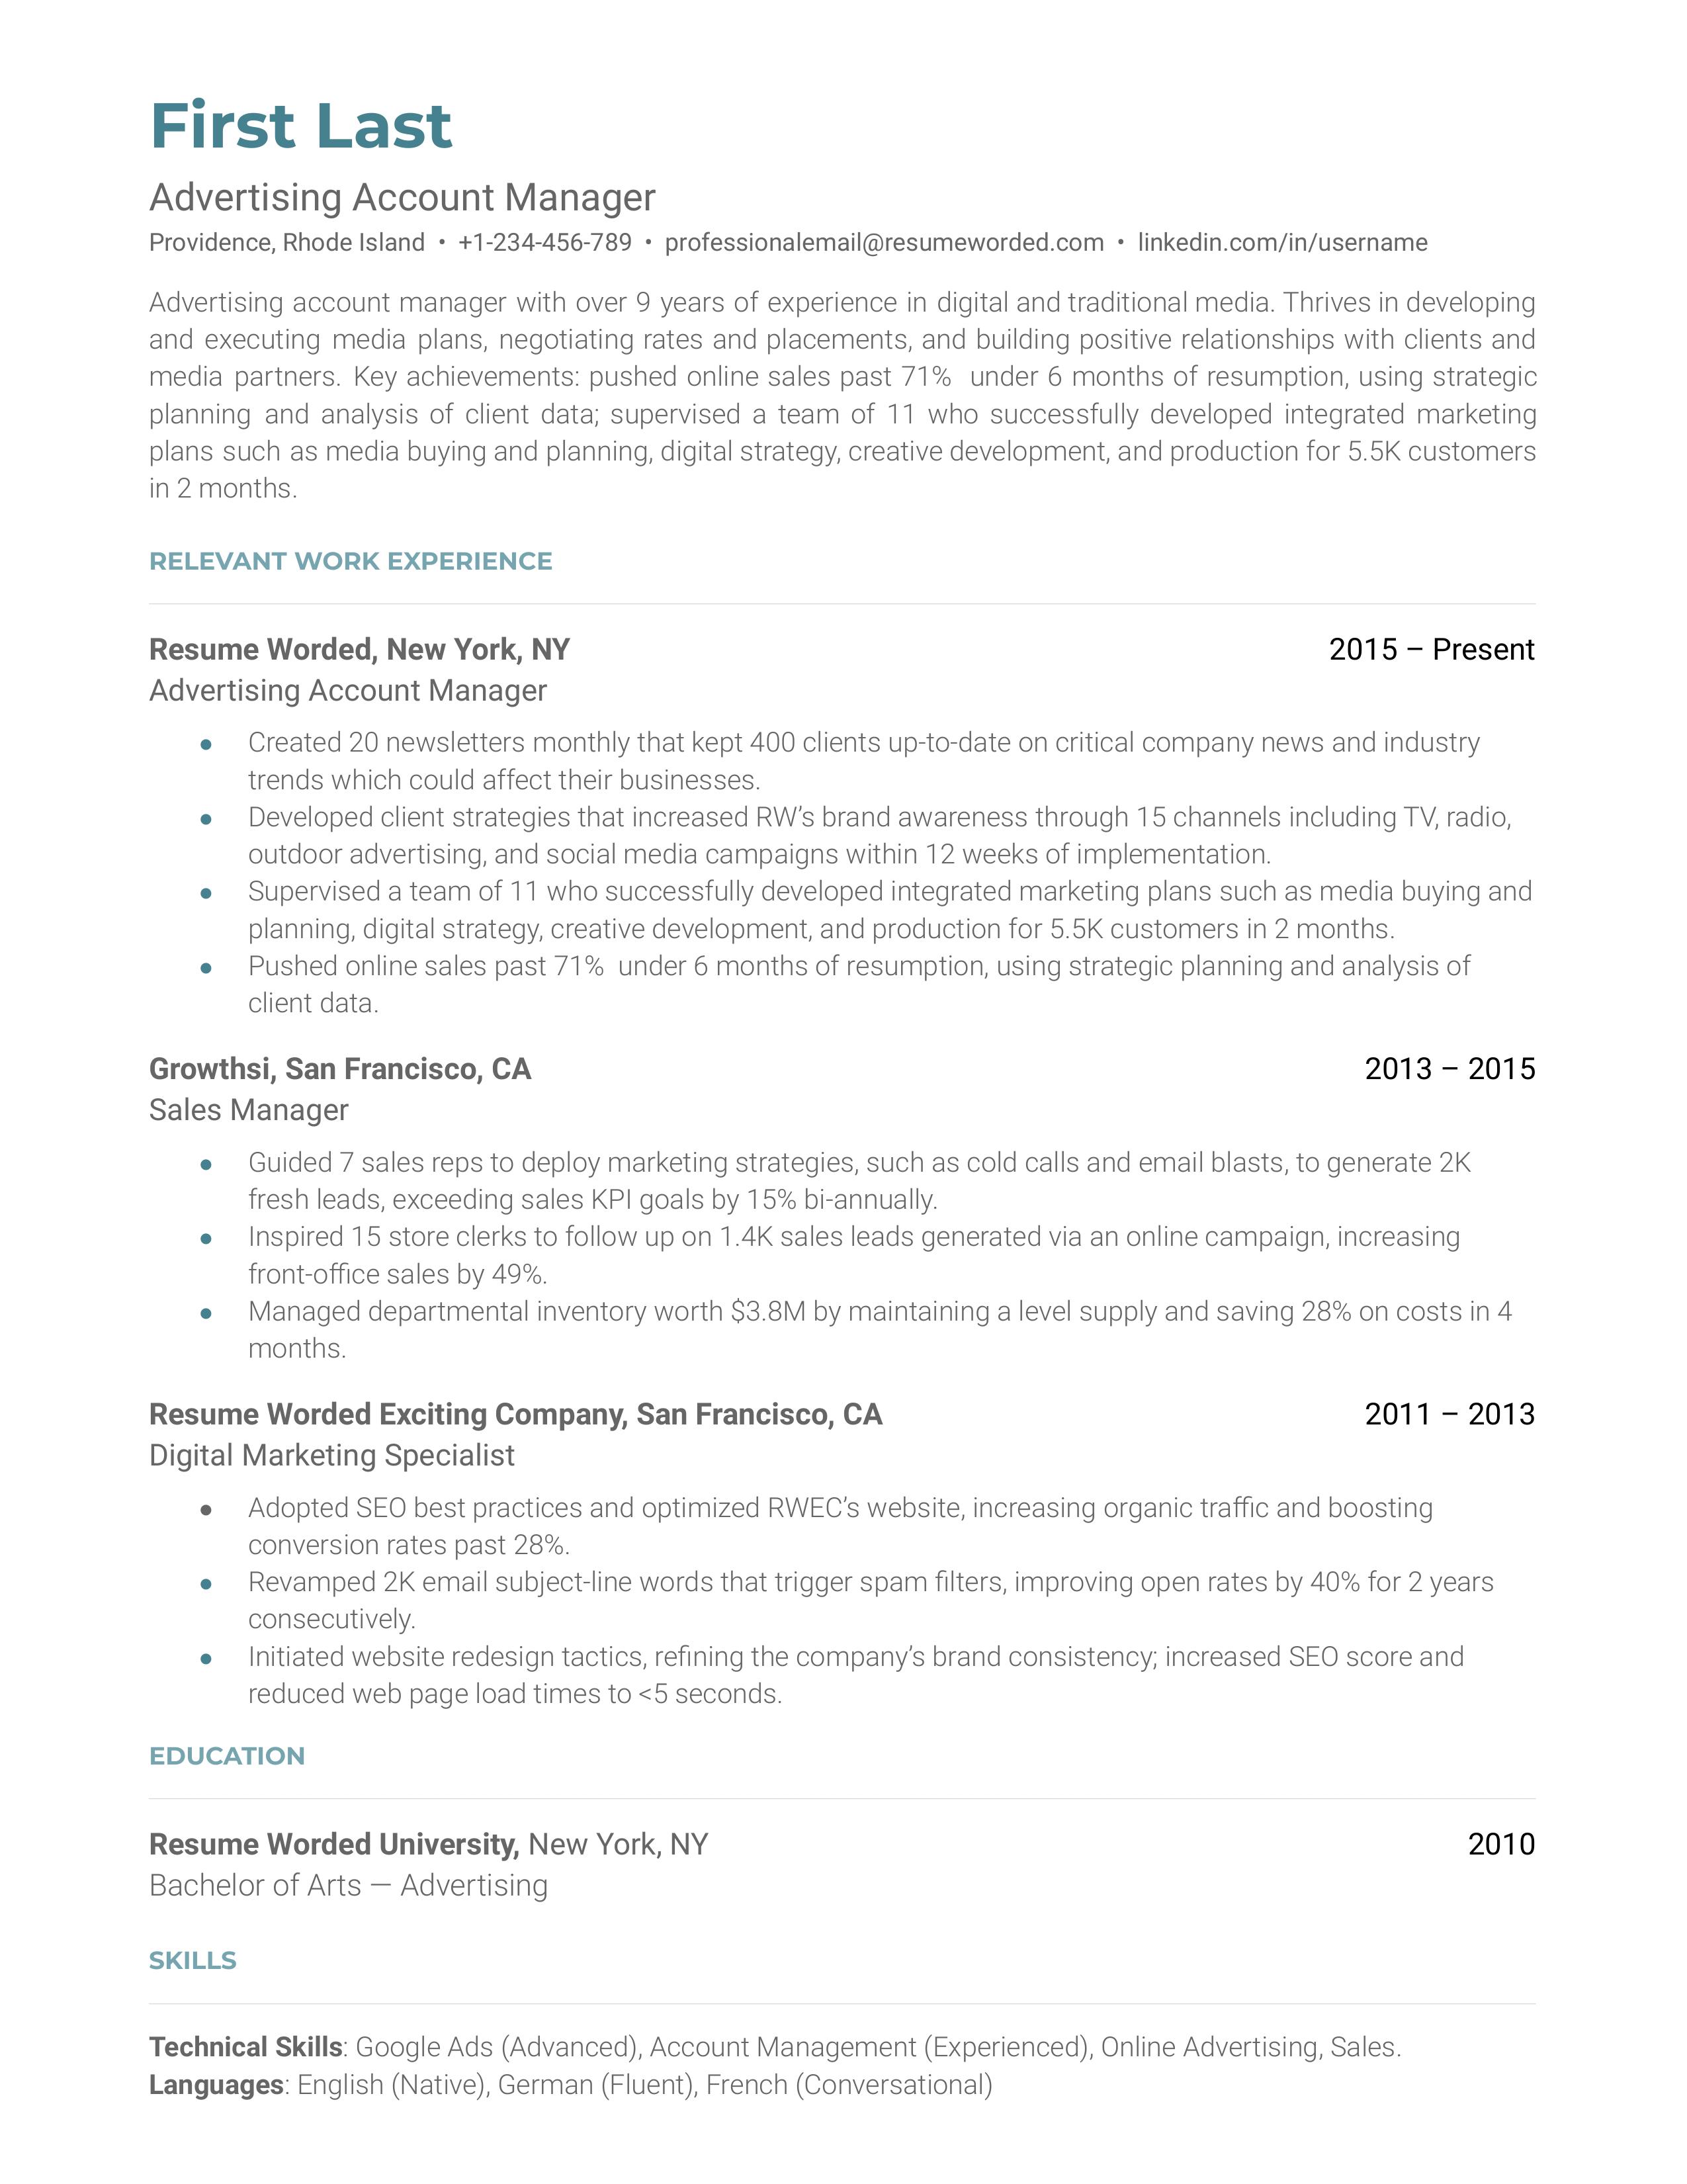 A CV screenshot showcasing expertise in client relationship management and awareness of latest advertising trends for an Advertising Account Manager role.